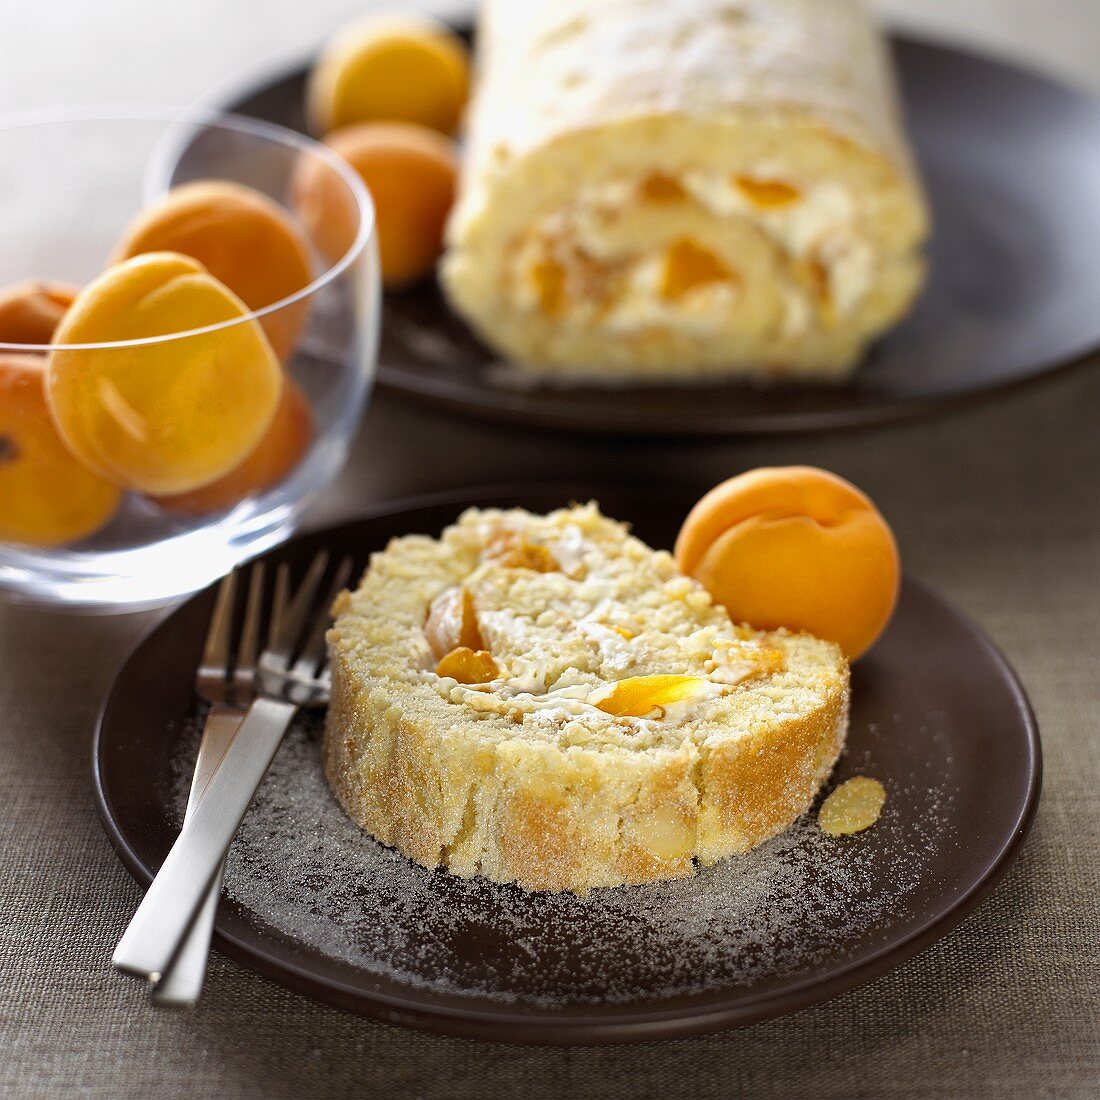 Apricot and almond roulade